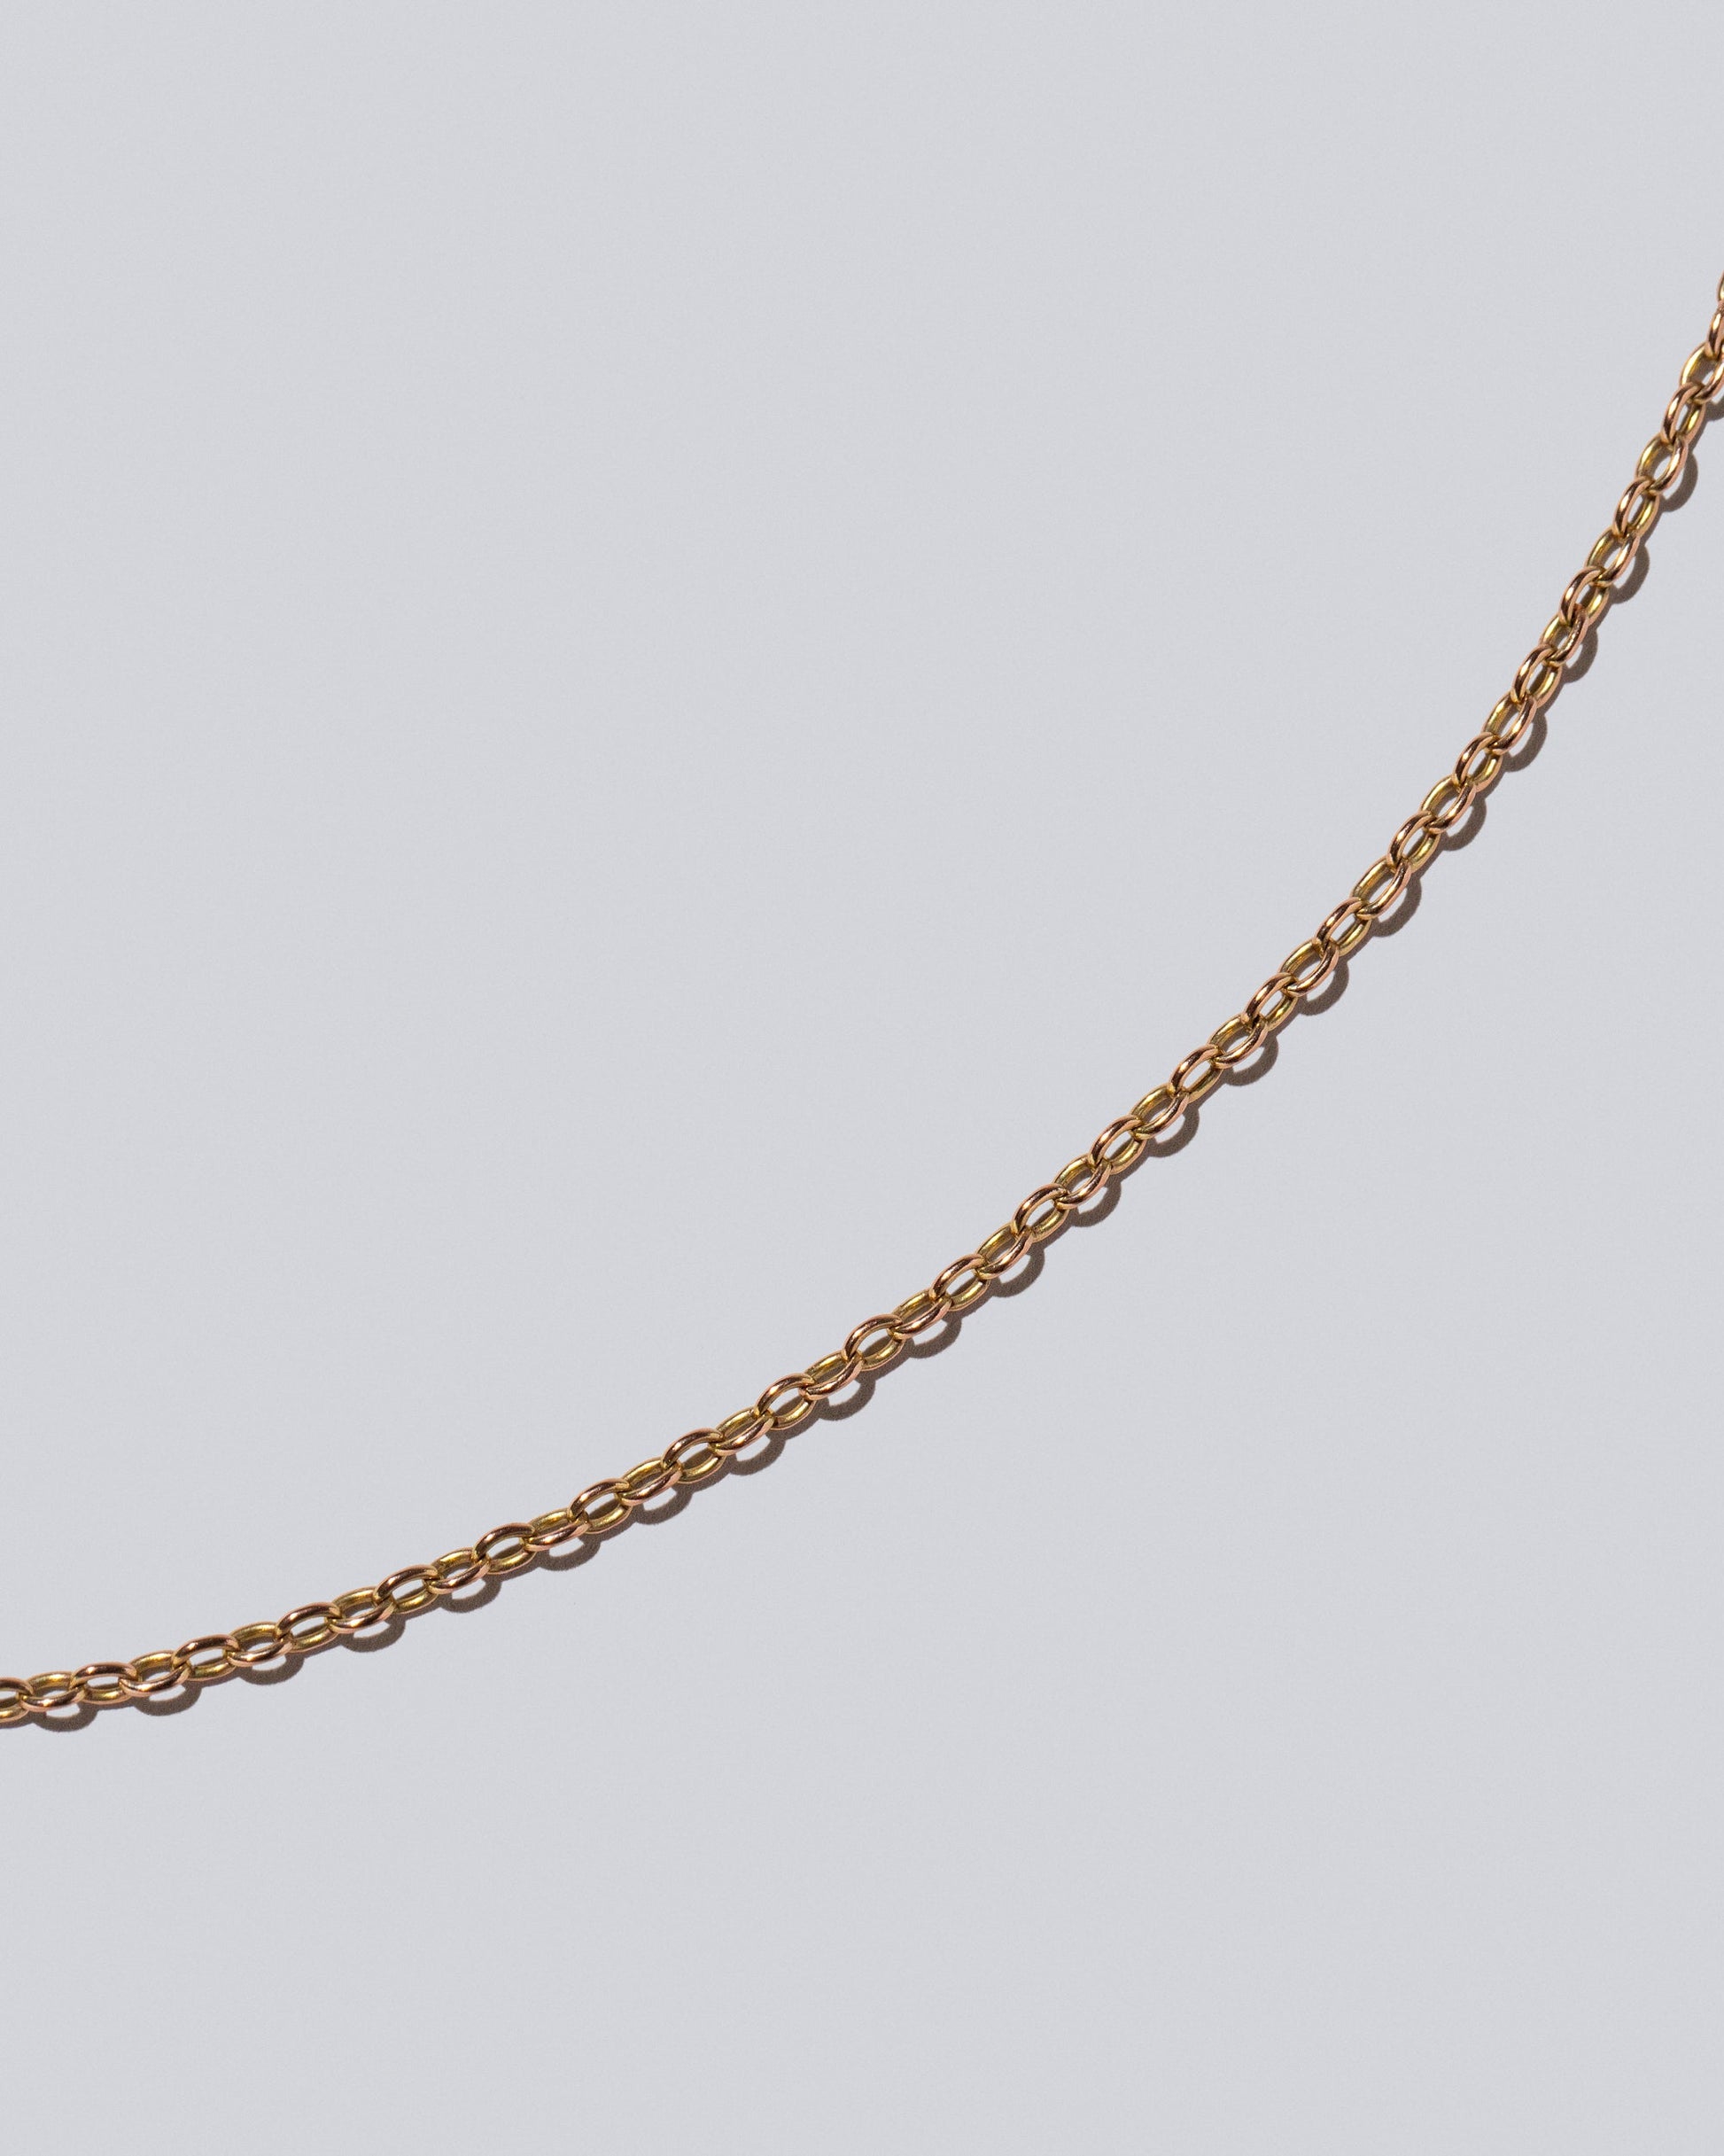 Antique Chain on light colored background.